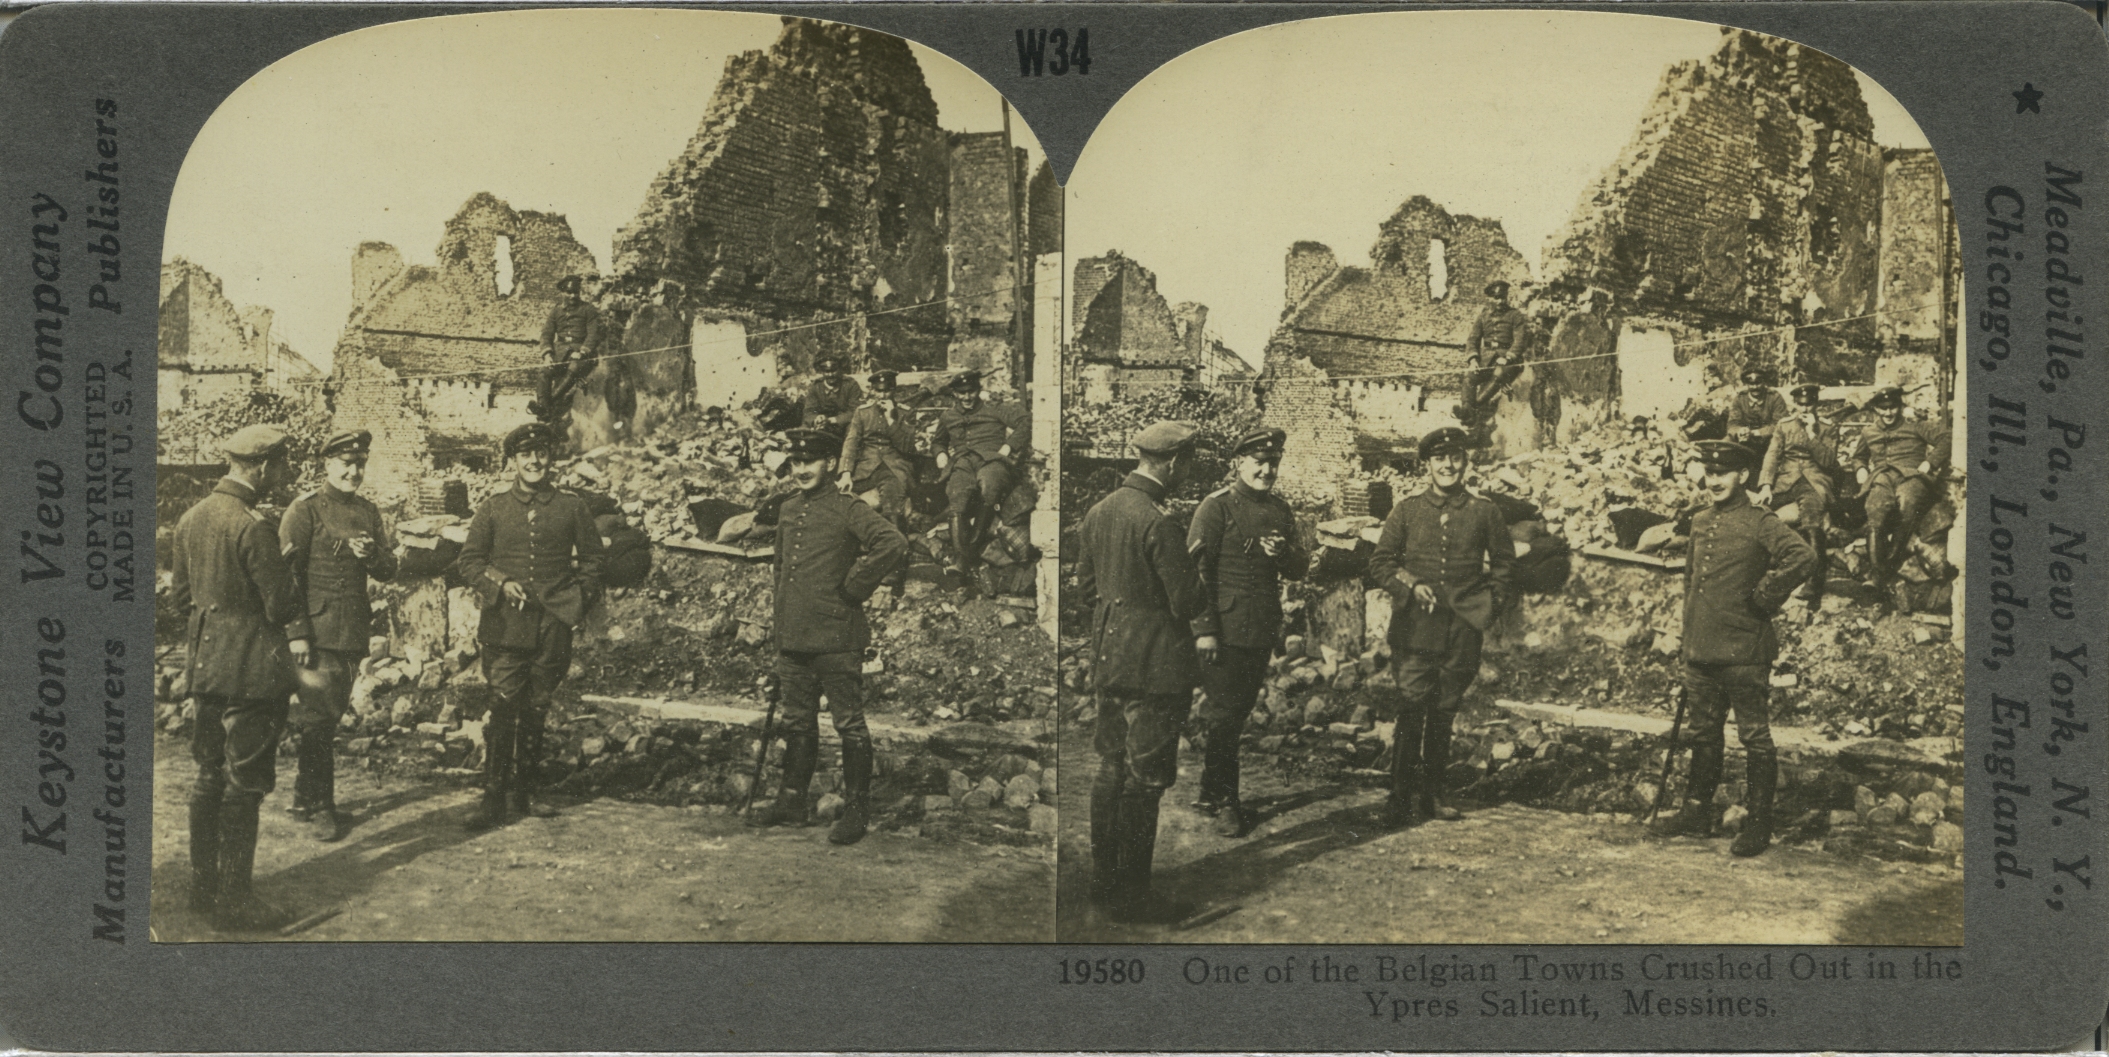 One of the Belgian Towns Crushed Out in the Ypres Salient, Messines